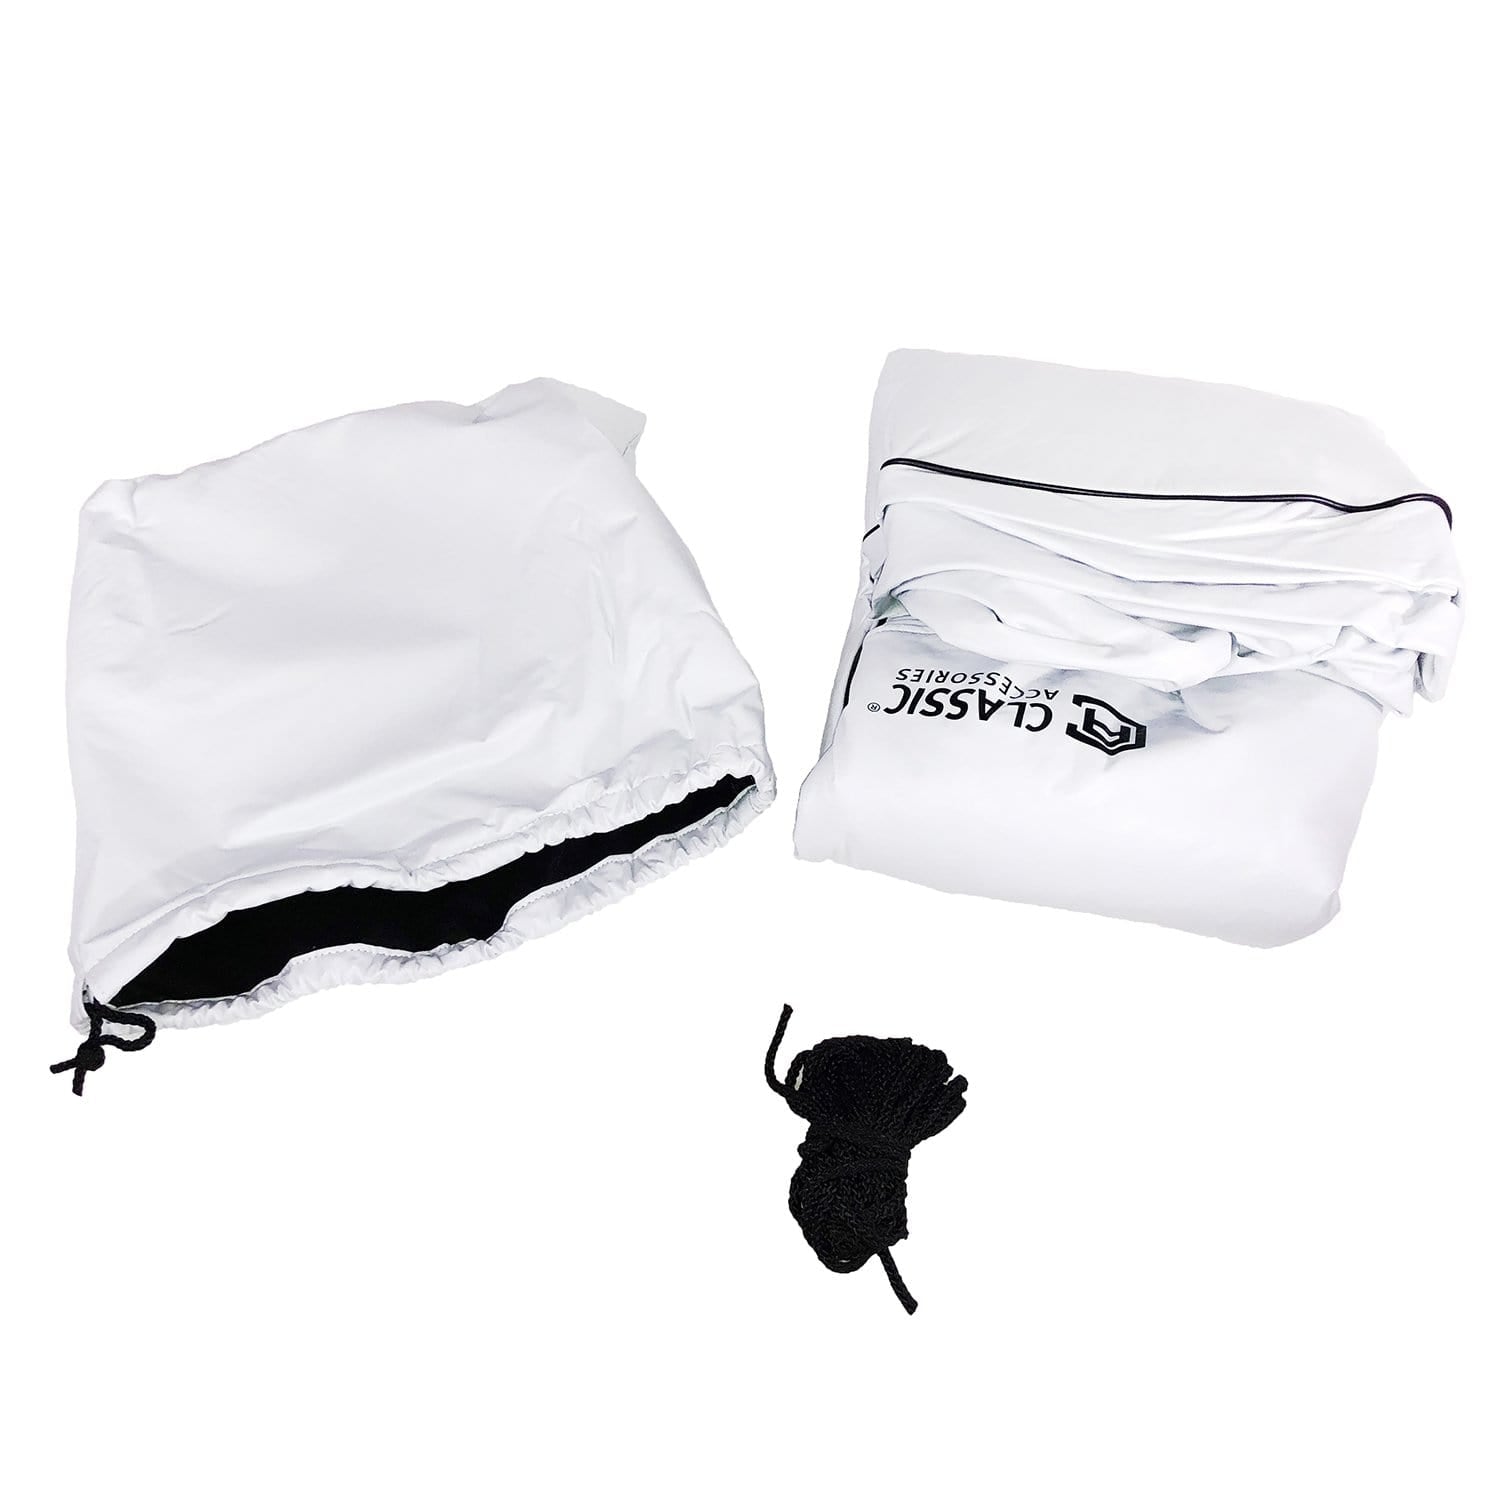 Classic Accessories 80-223-172302-00 Deluxe Vinyl Single Axle Tire Covers 32"- 34.5" White 4 Pack